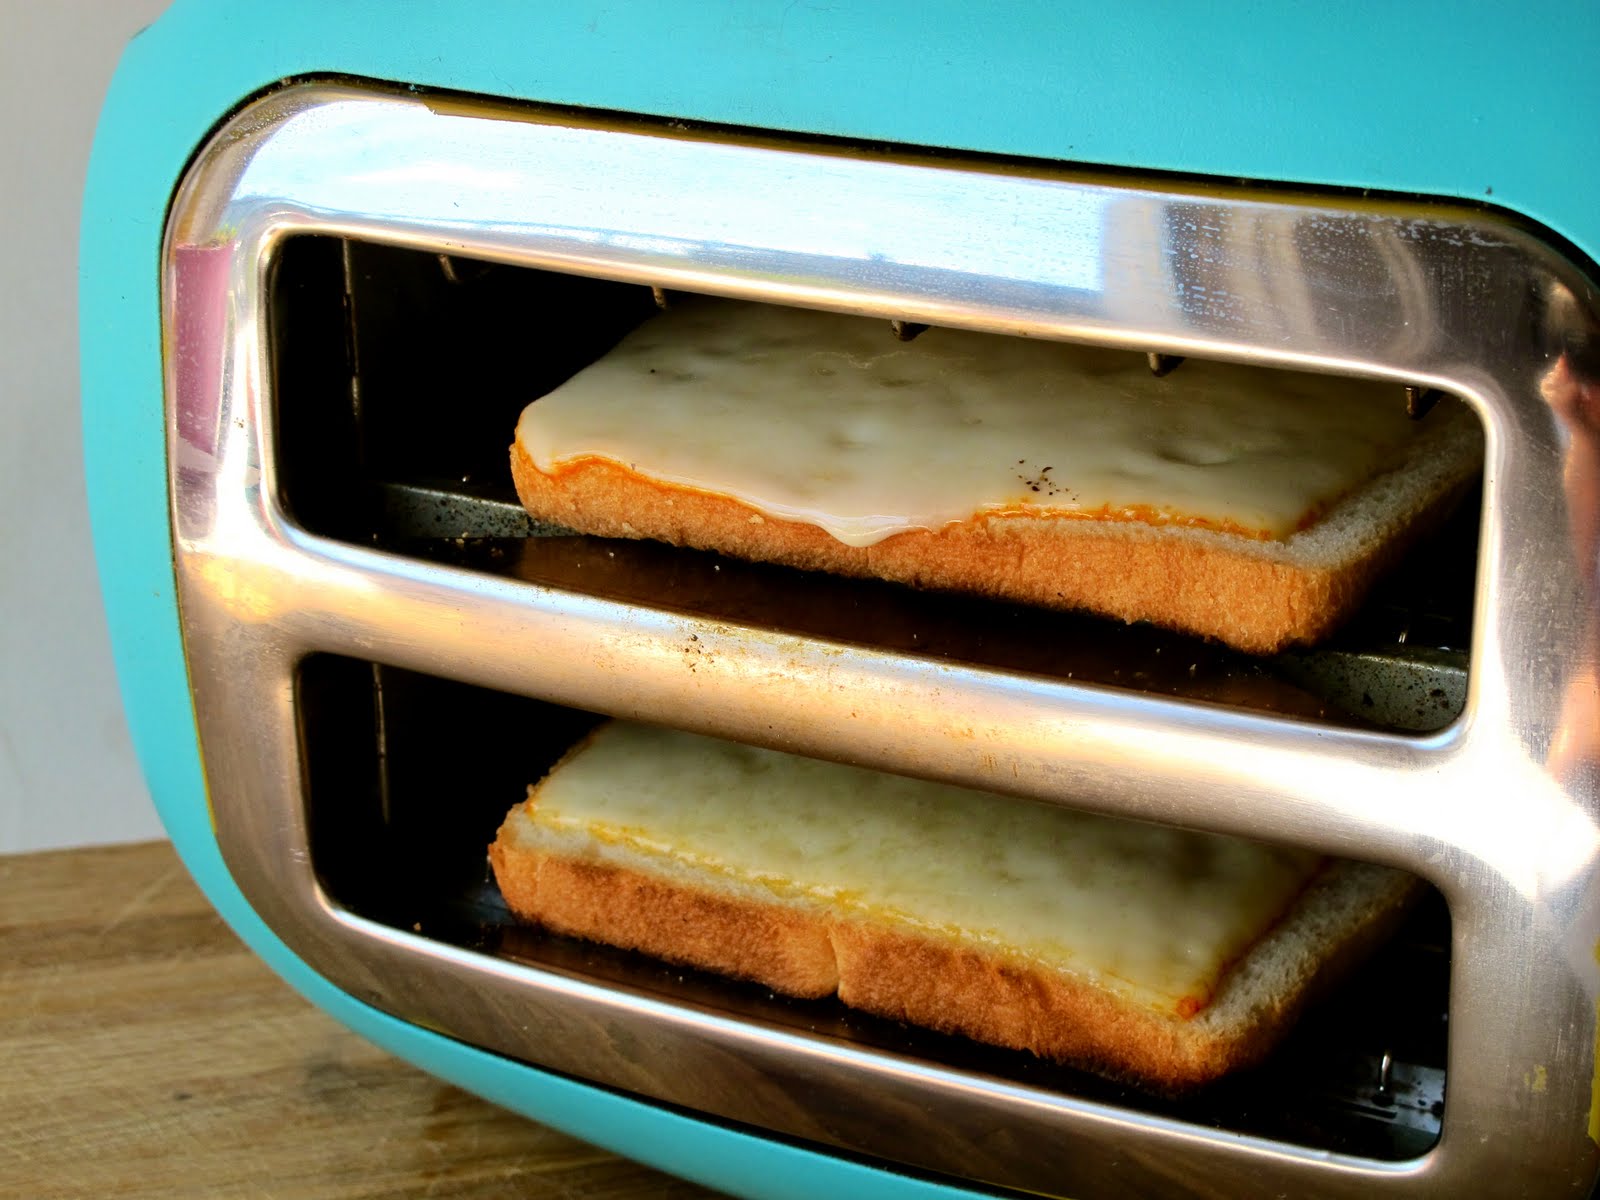 https://grilledcheesesocial.com/wp-content/uploads/2011/09/how-to-make-a-grilled-cheese-in-a-toaster-grilled-cheese-social.jpg